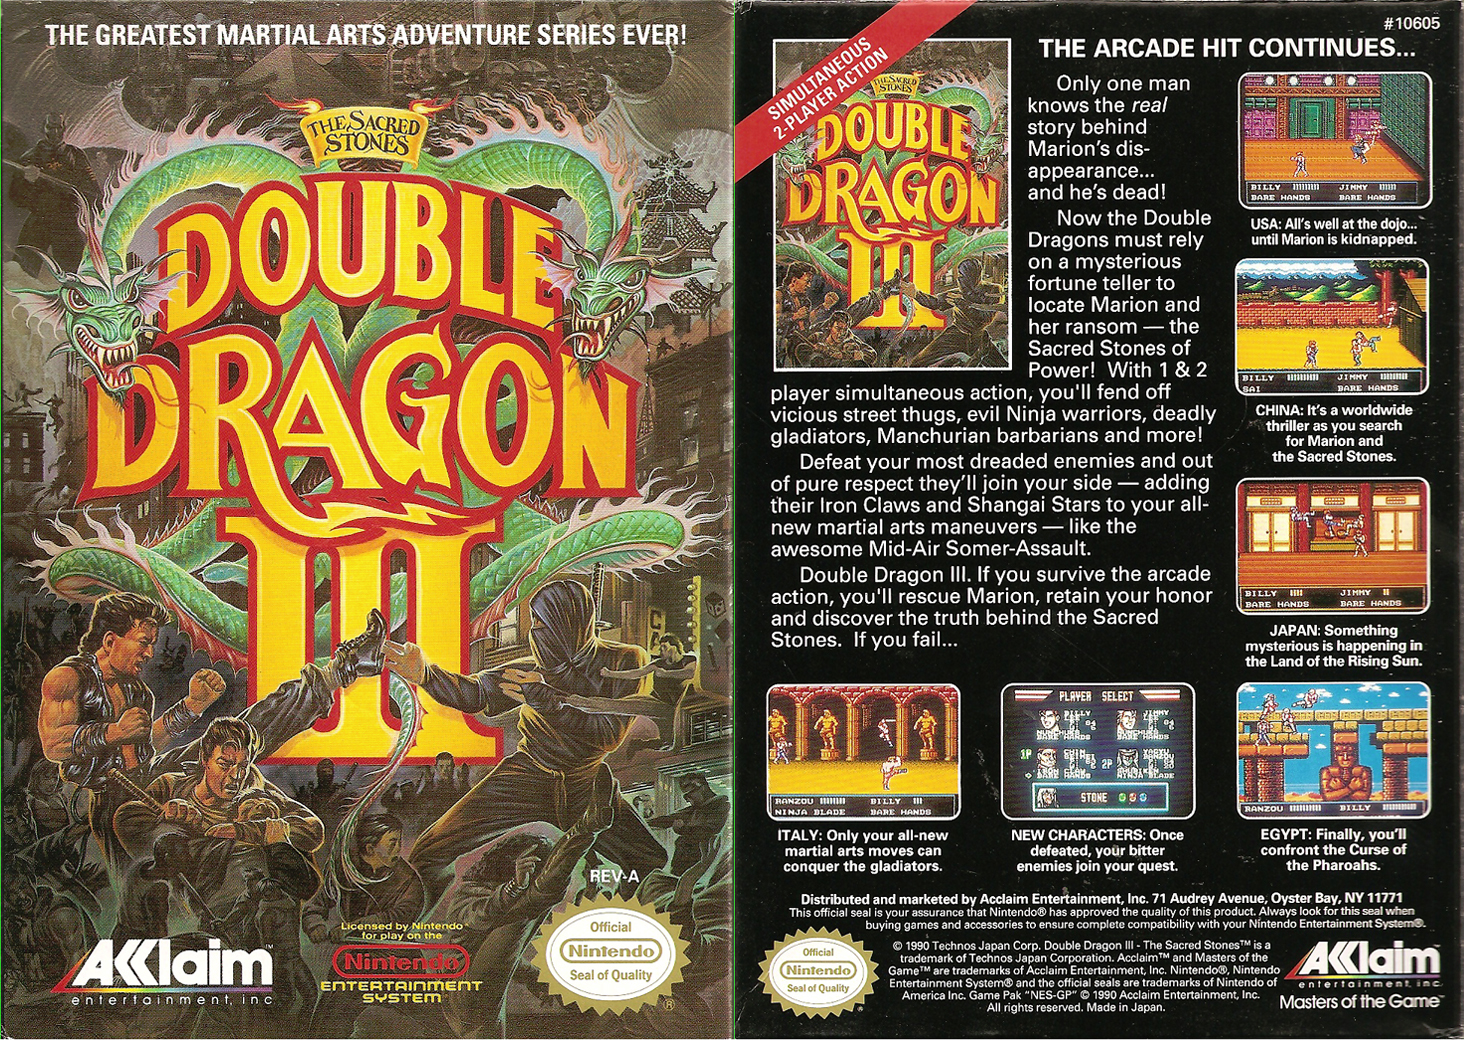 Japan-only 'Double Dragon' game comes to the Super NES this summer